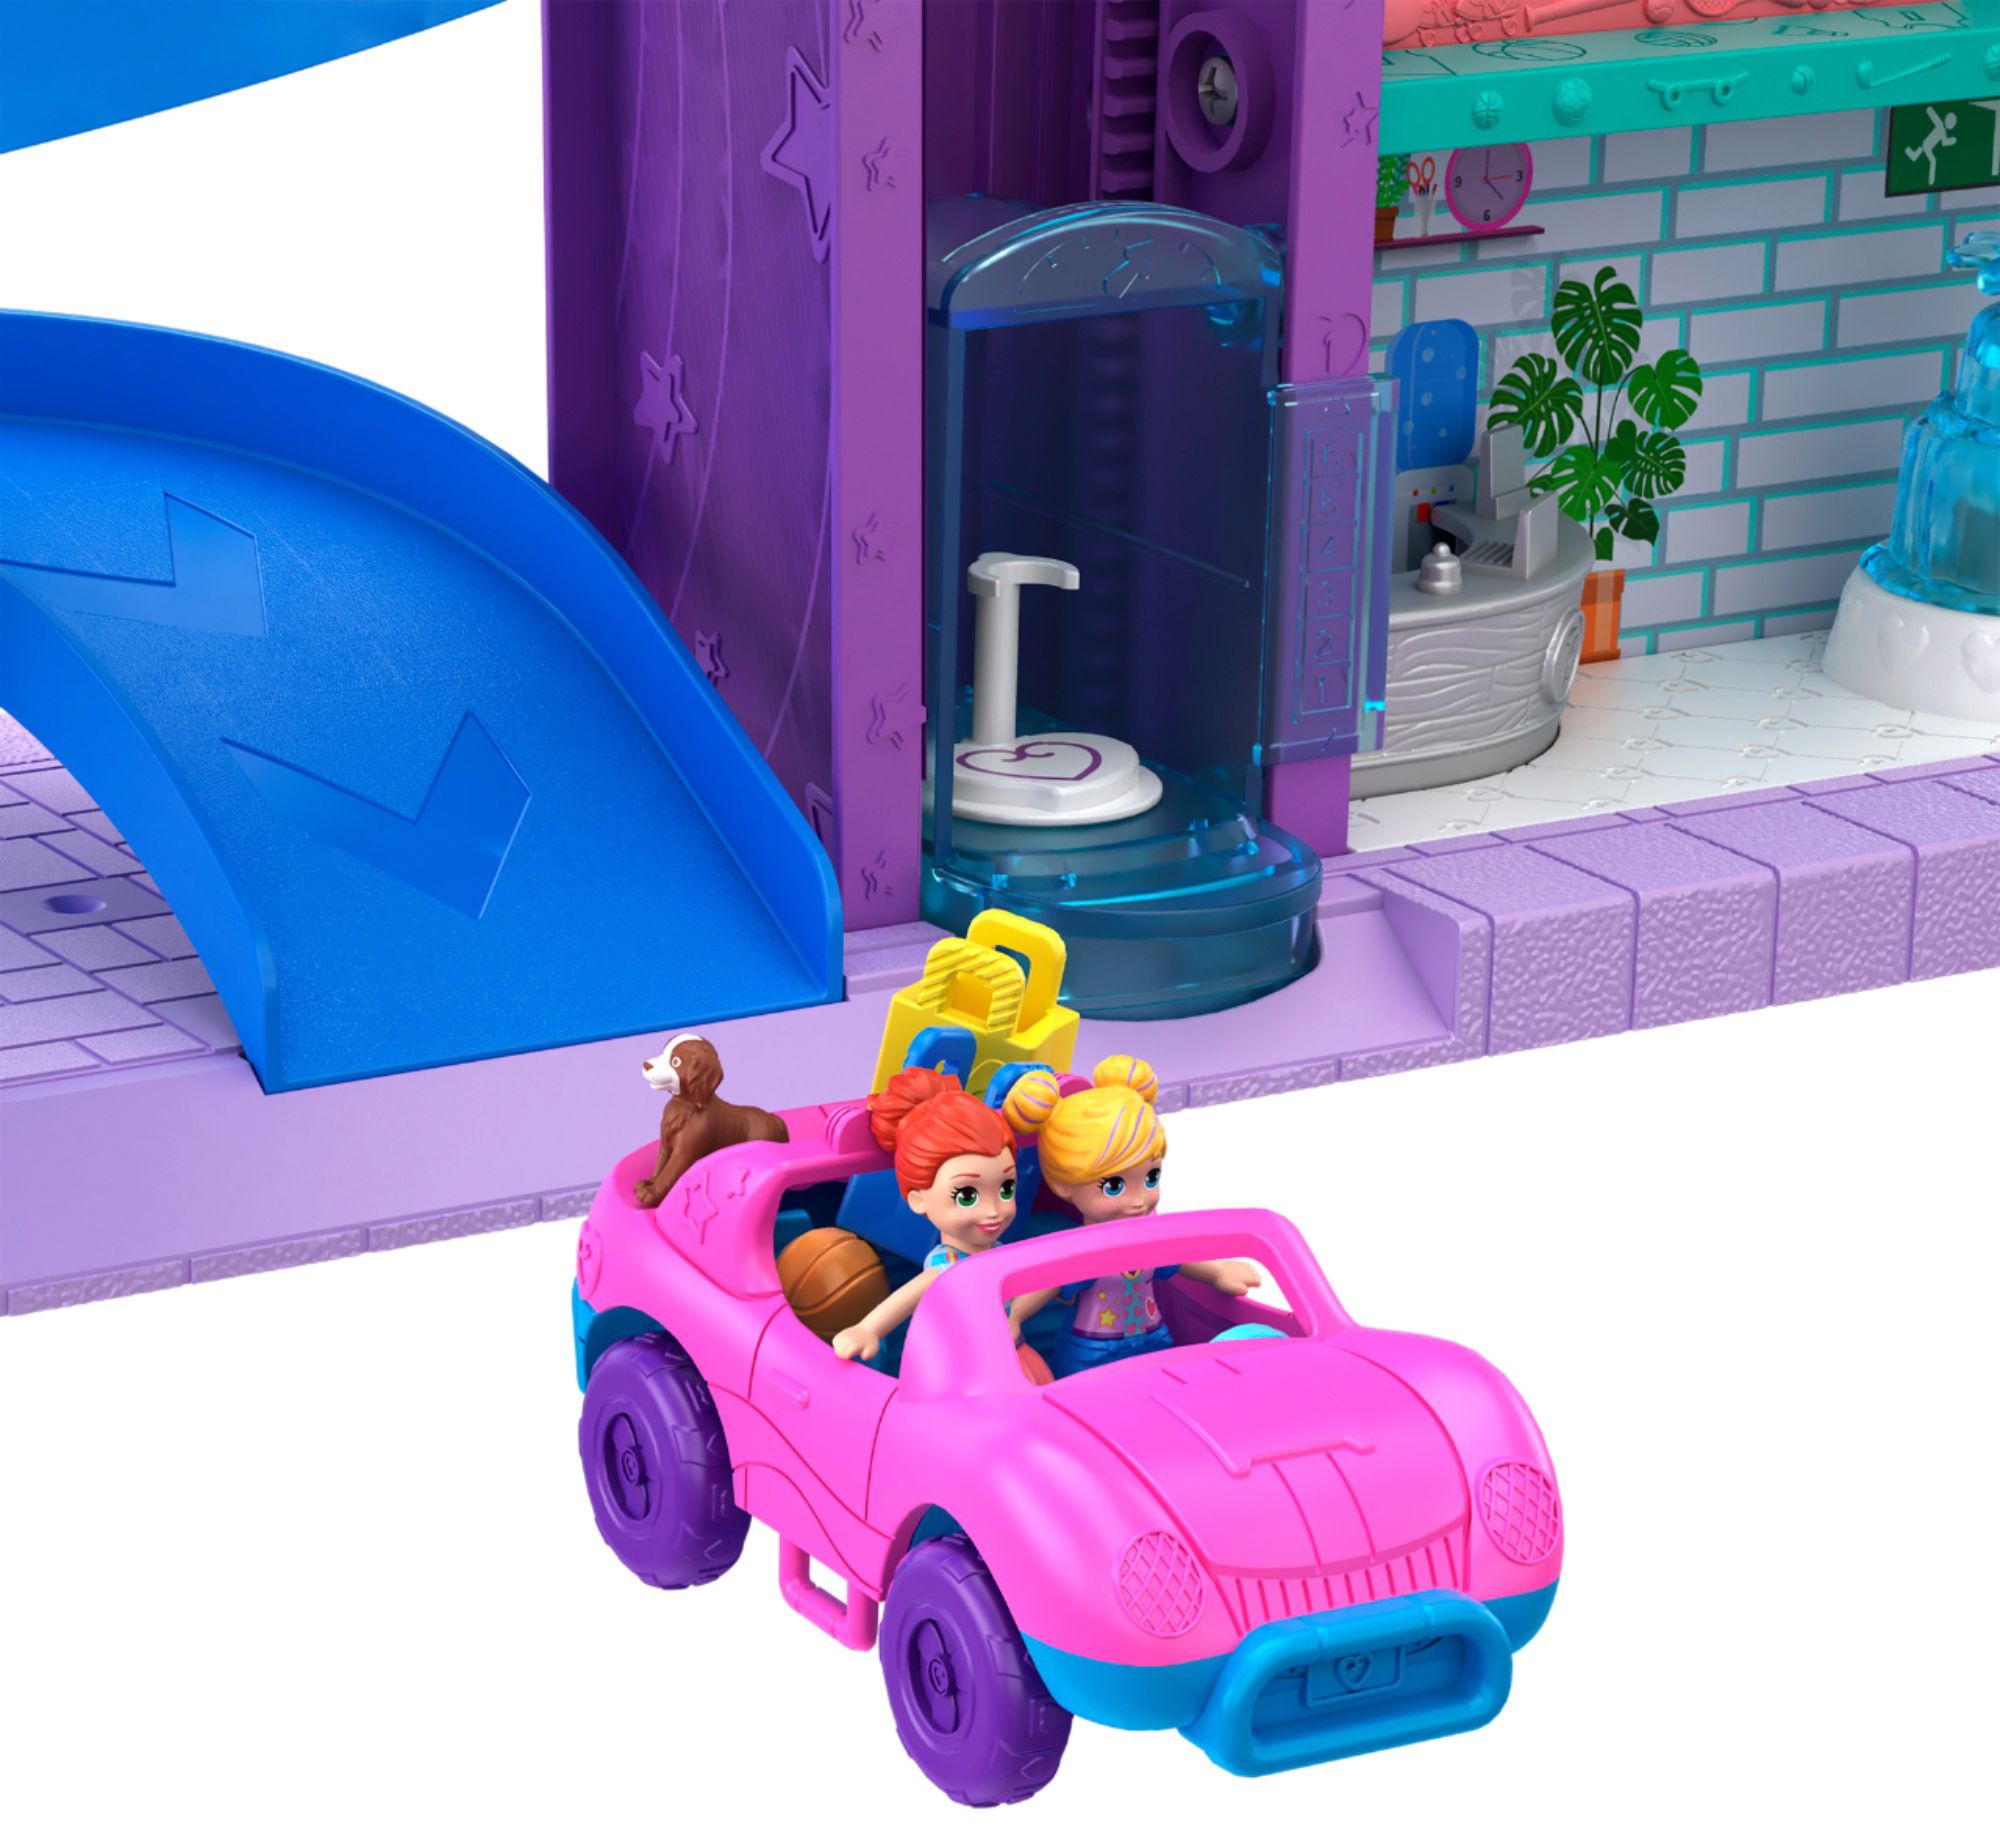 Polly Pocket GFP89 Mega Mall with 6 Floors Elevator & Micro Dolls, Vehicle 